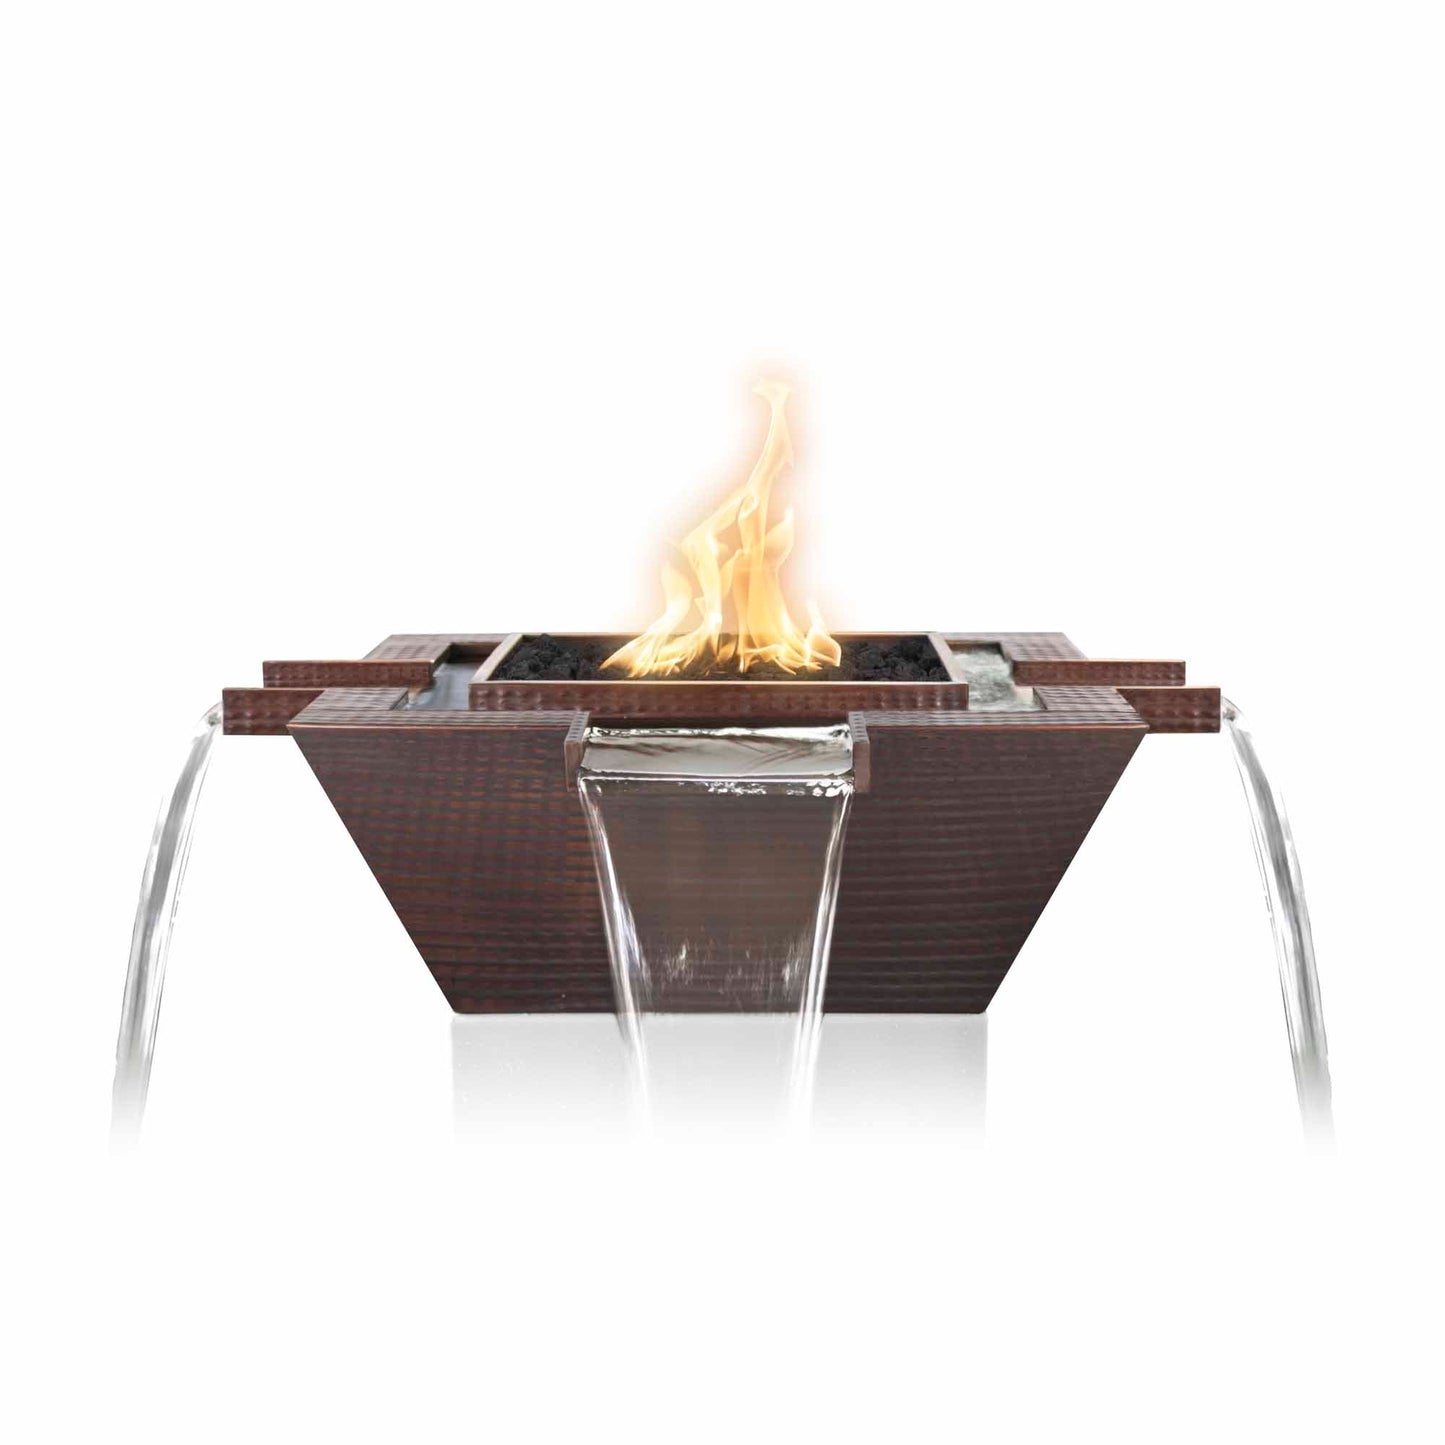 The Outdoor Plus Square Maya 36" Silver Vein Powder Coated Metal Liquid Propane Fire & Water Bowl 4-Way Spill with Match Lit Ignition